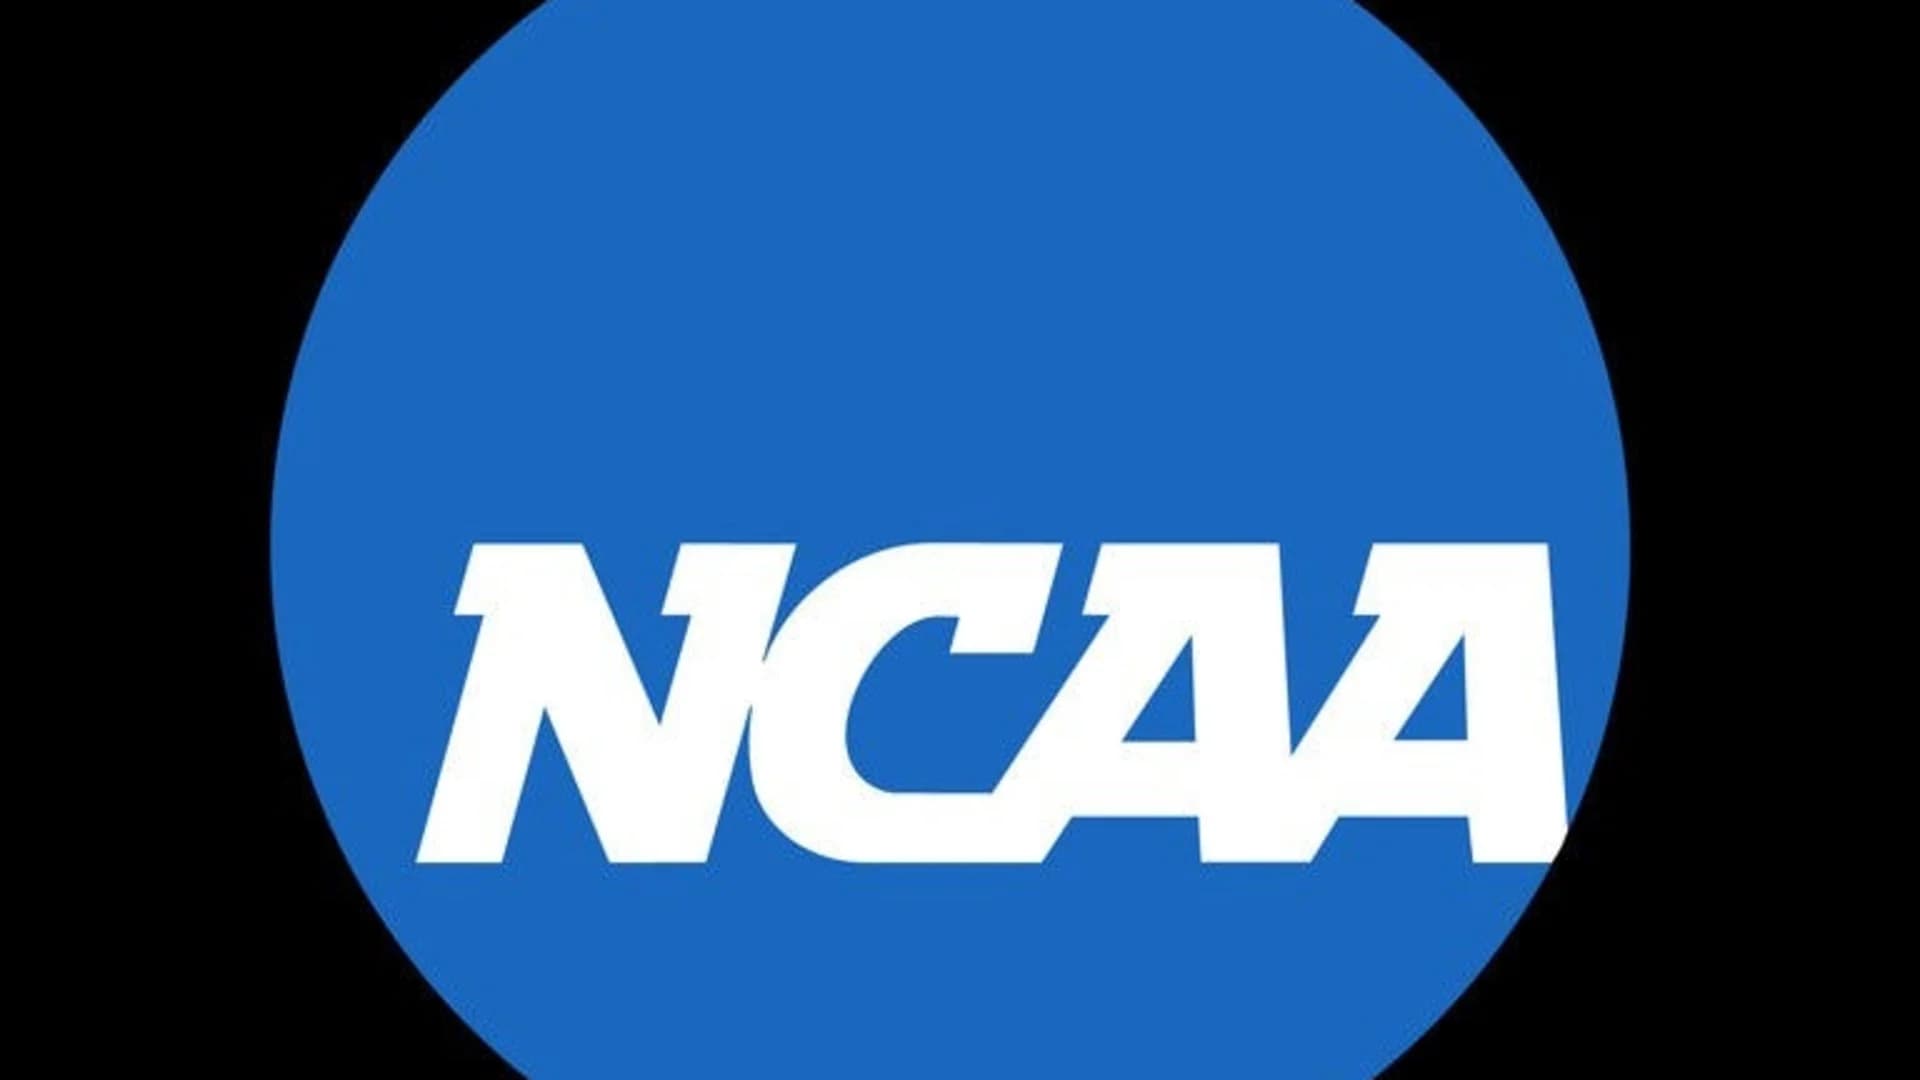 NCAA board approves athlete compensation for image, likeness